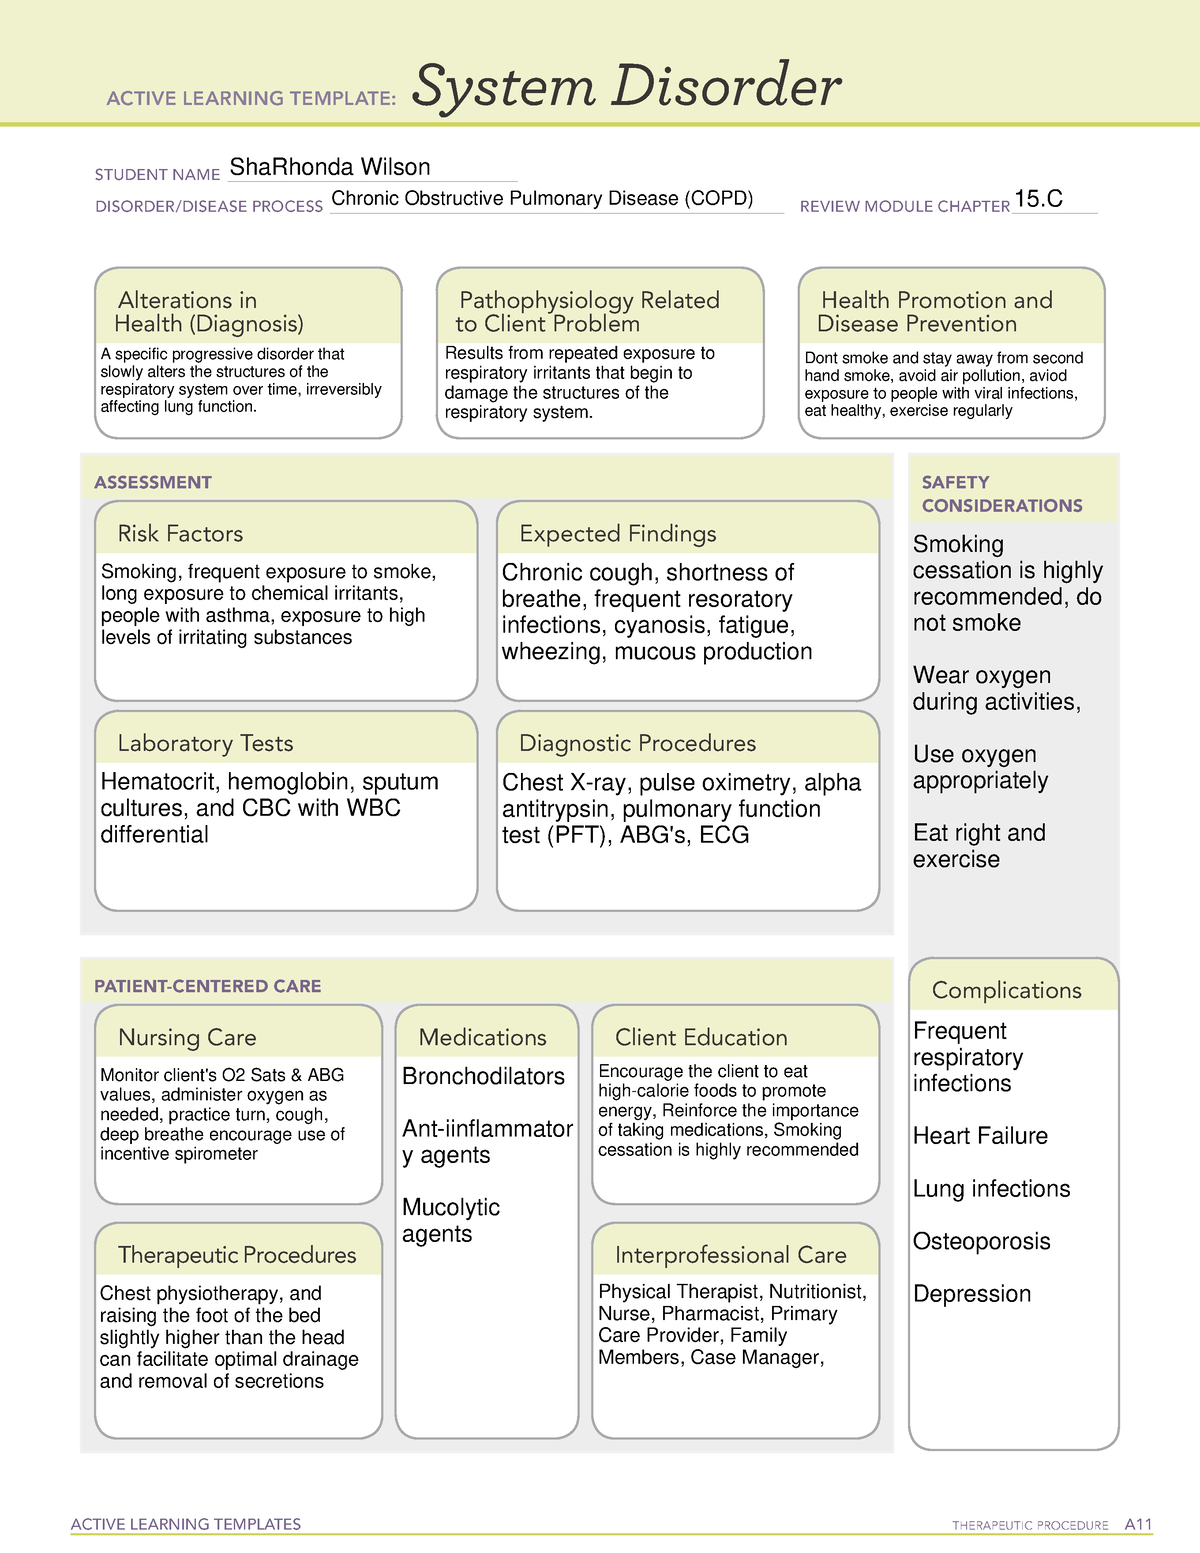 COPD System Disorder N/A ACTIVE LEARNING TEMPLATES THERAPEUTIC